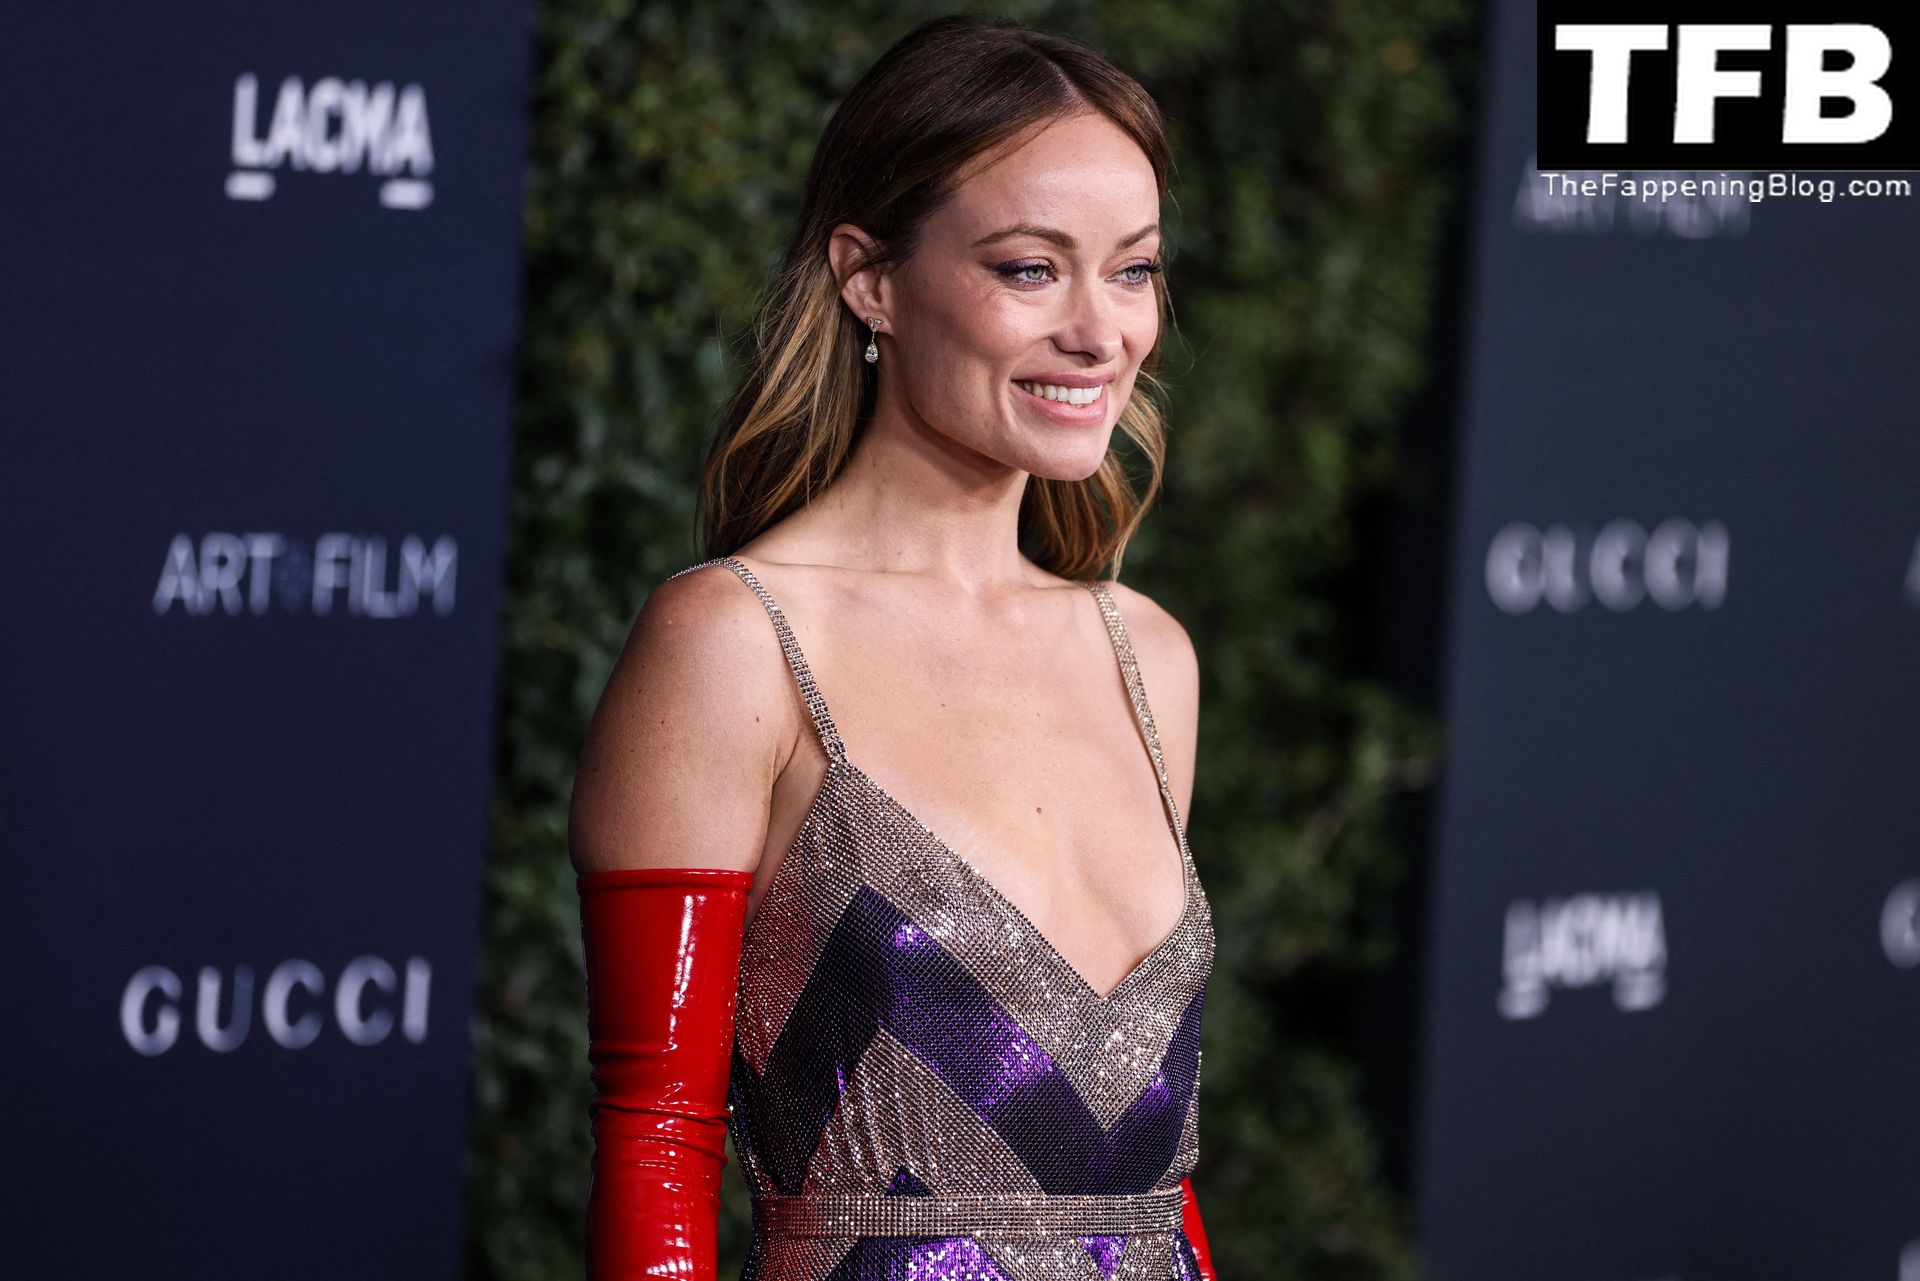 Olivia-Wilde-Sexy-The-Fappening-Blog-30.jpg